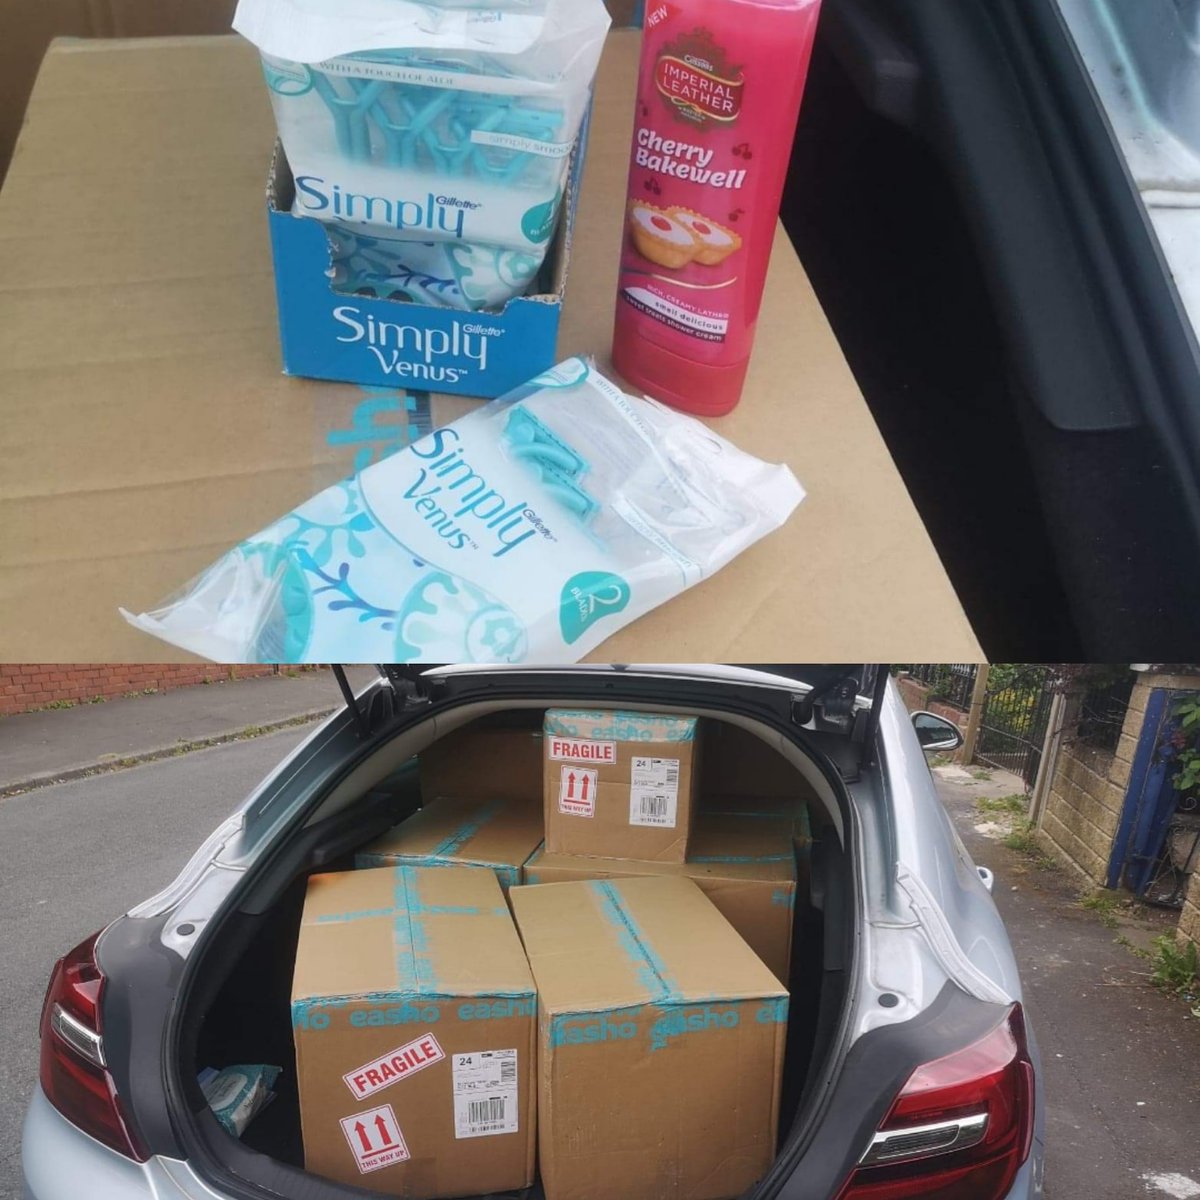 💛🌟 @eashouk 🌟💛 Thank you so much for this express delivery to enable us to do our #HygienePacks next week!🙏 600 bottles of @loveimperialleather #ShowerGel and 350 packs of @gillettevenus #Razors @thehygienebank #TheHygieneBank #StokeOnTrent #Staffordshire #EndHygienePoverty